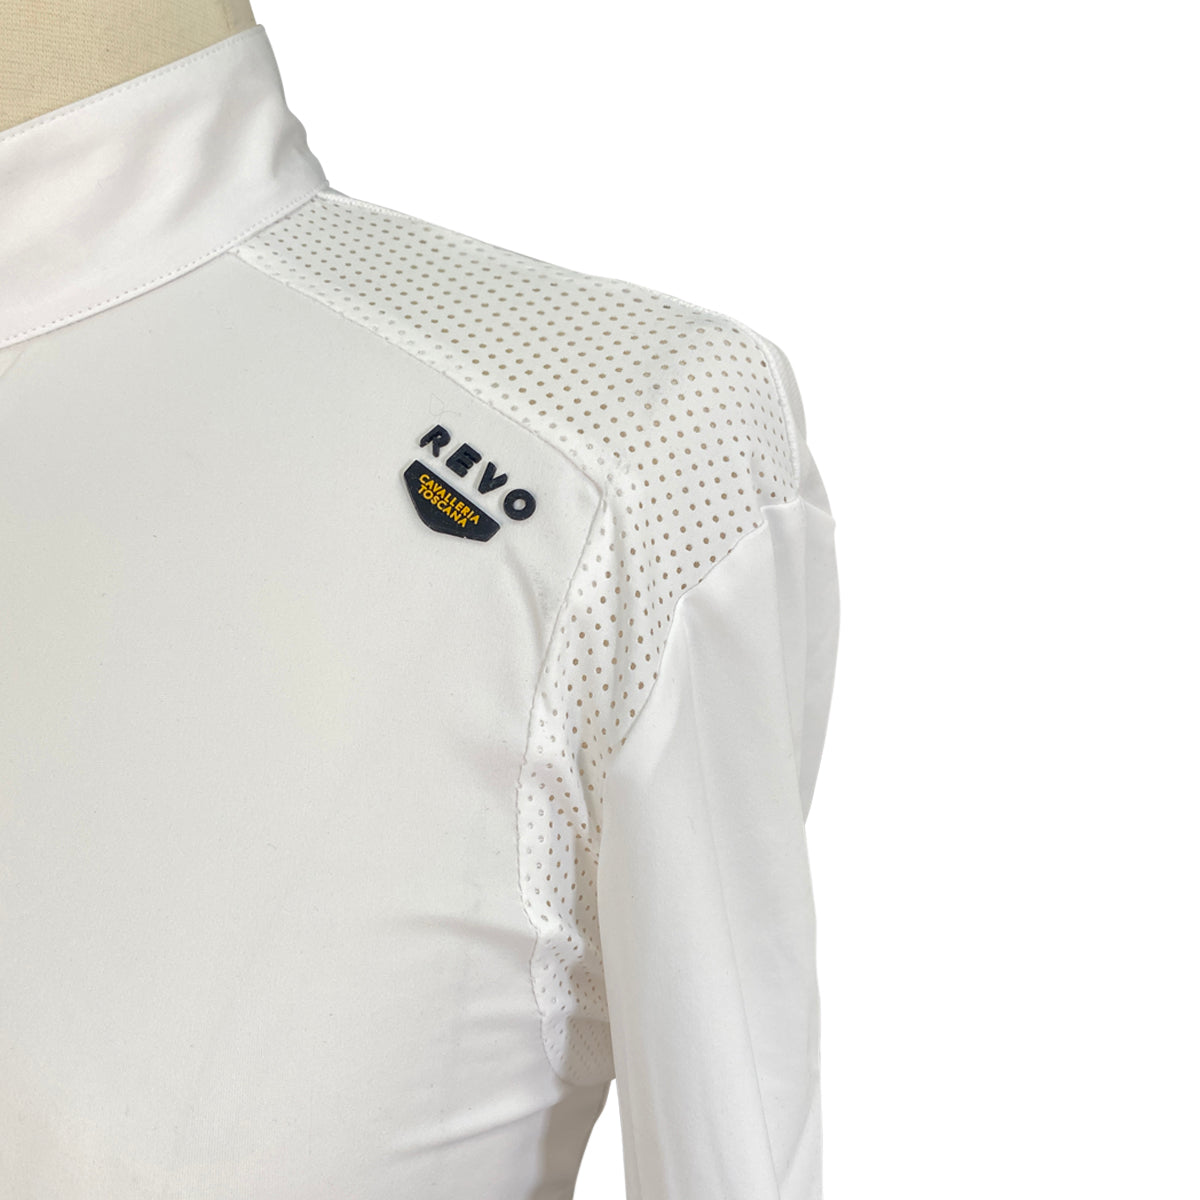 Cavalleria Toscana R-EVO L/S Competition Shirt w/Perforated Insert in White